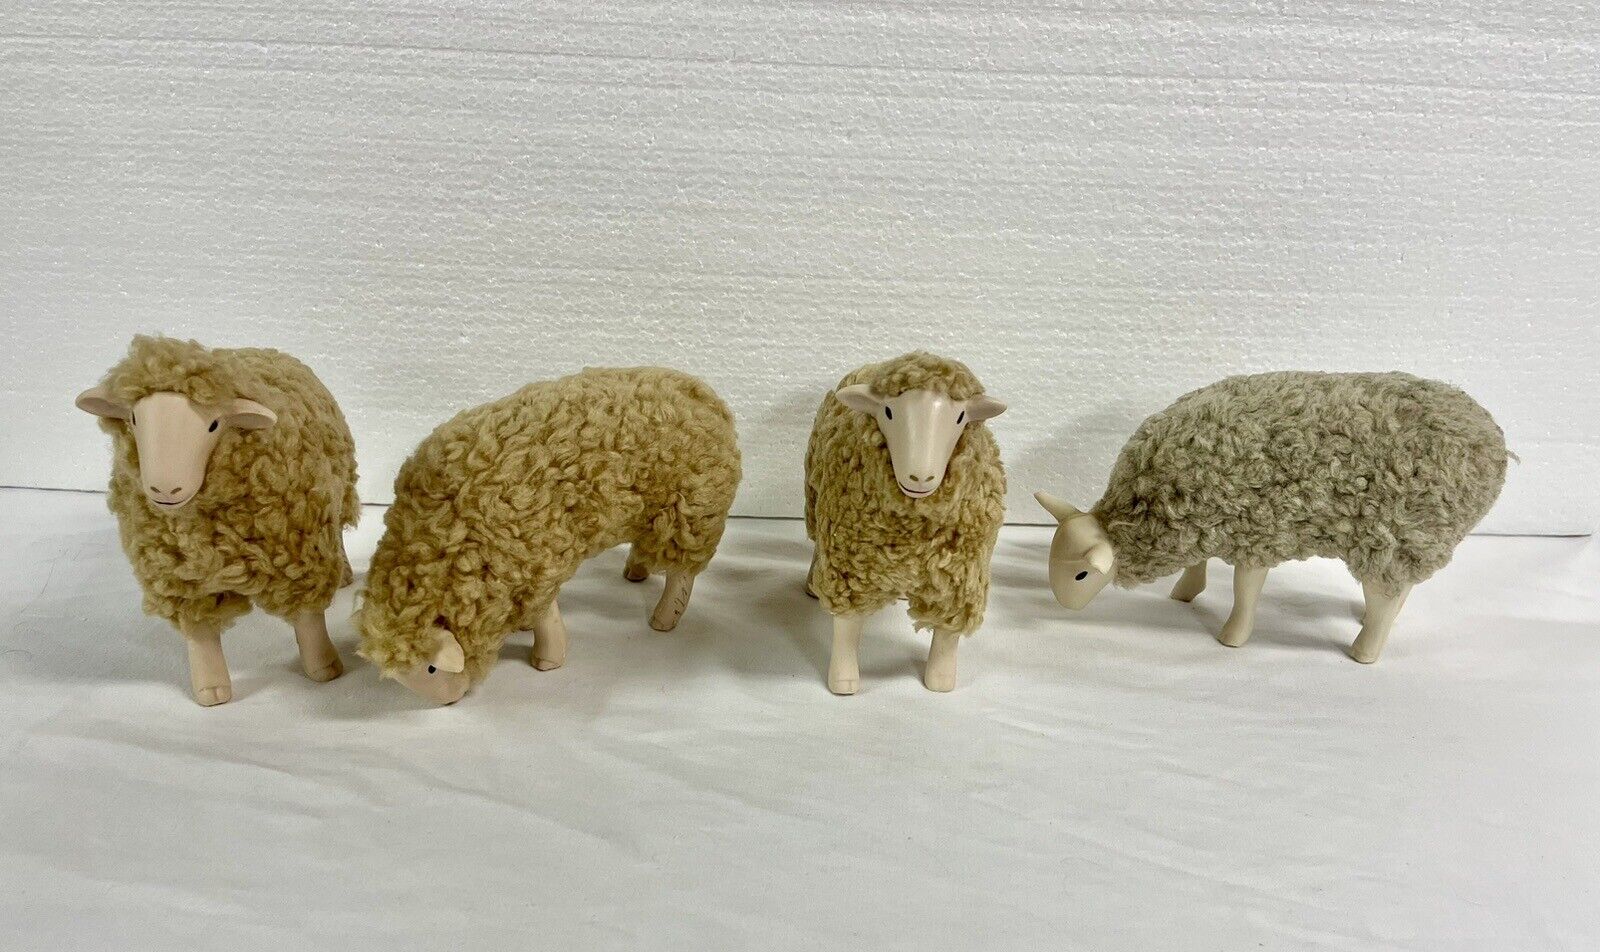 Colin's Creatures Romney & Border Leicester 4 Sheep Stone & Wool Figurines 